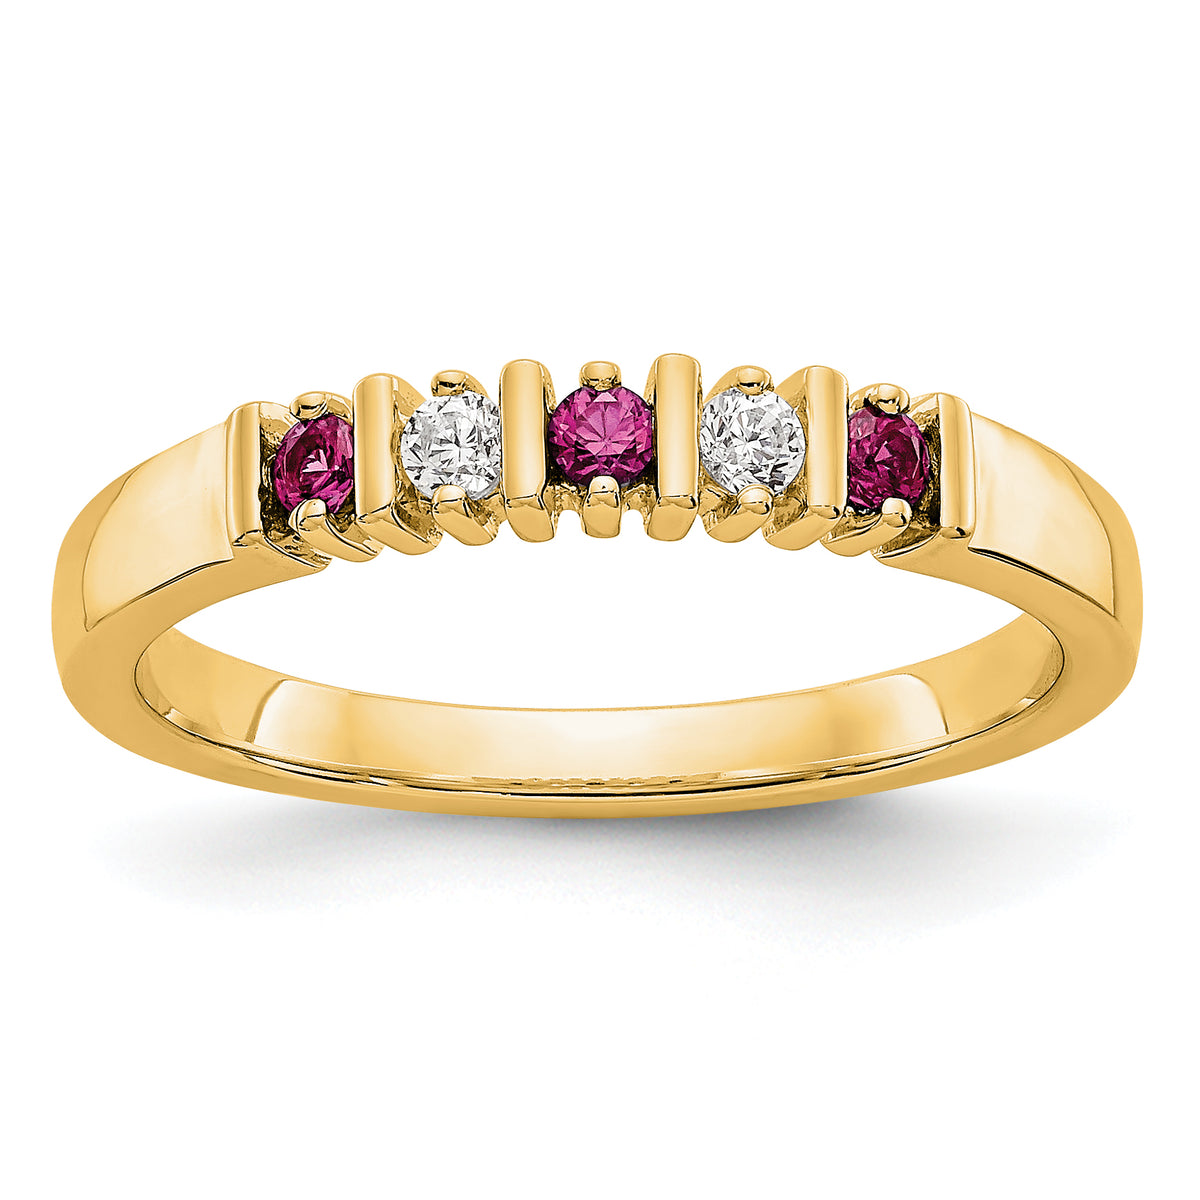 14K Yellow Gold 1/15 carat Diamond and Ruby Complete Band